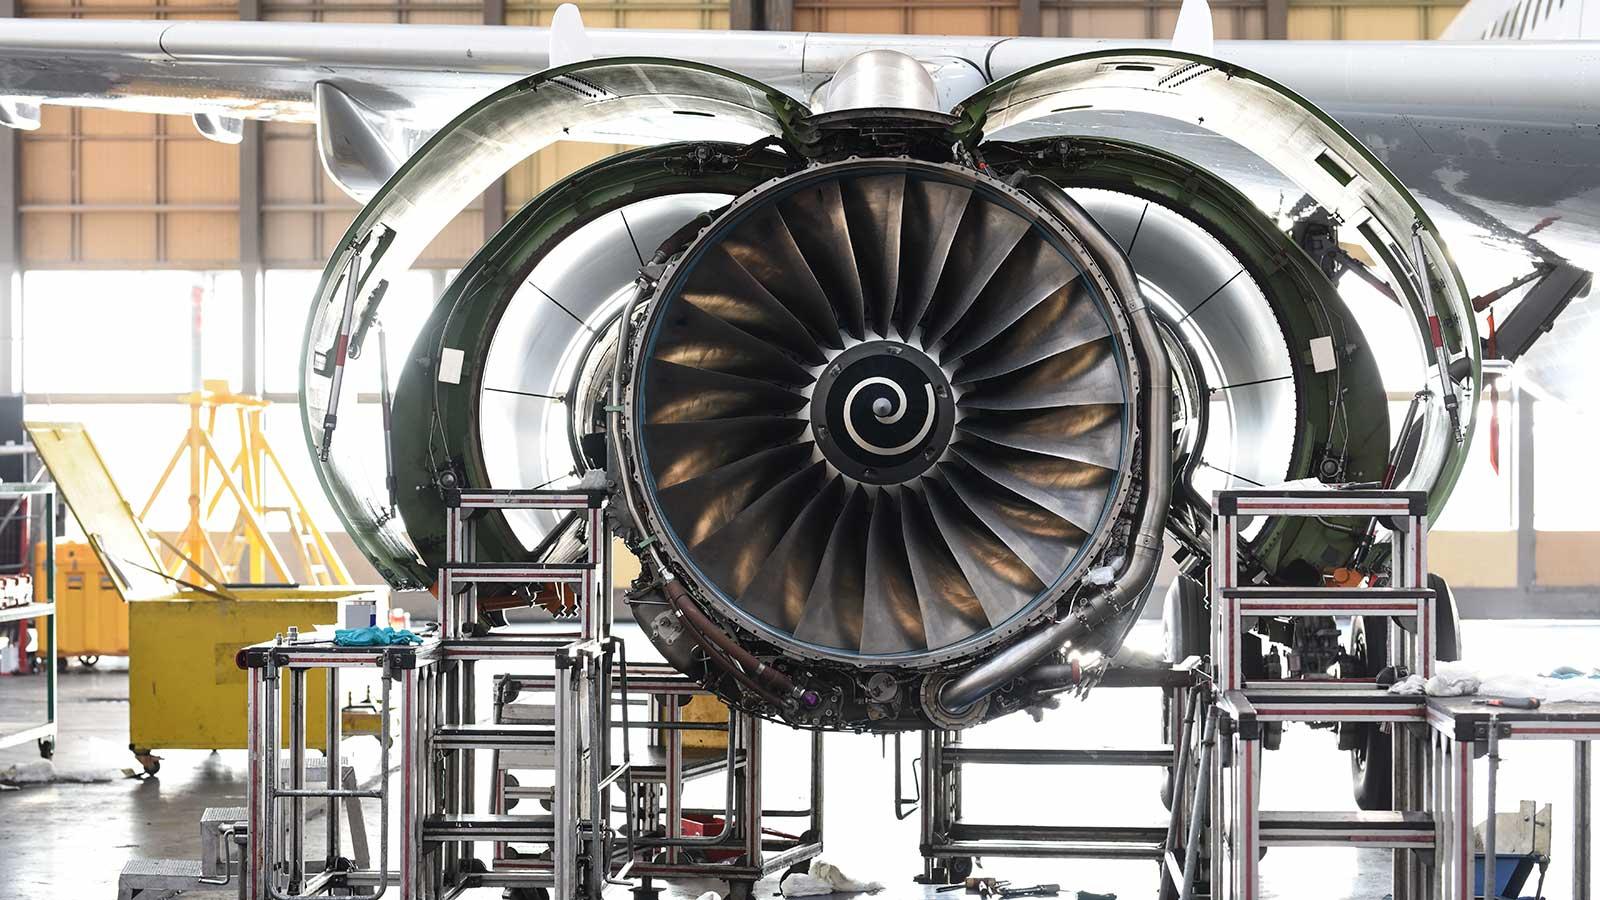 A jet engine being worked on in a large hangar